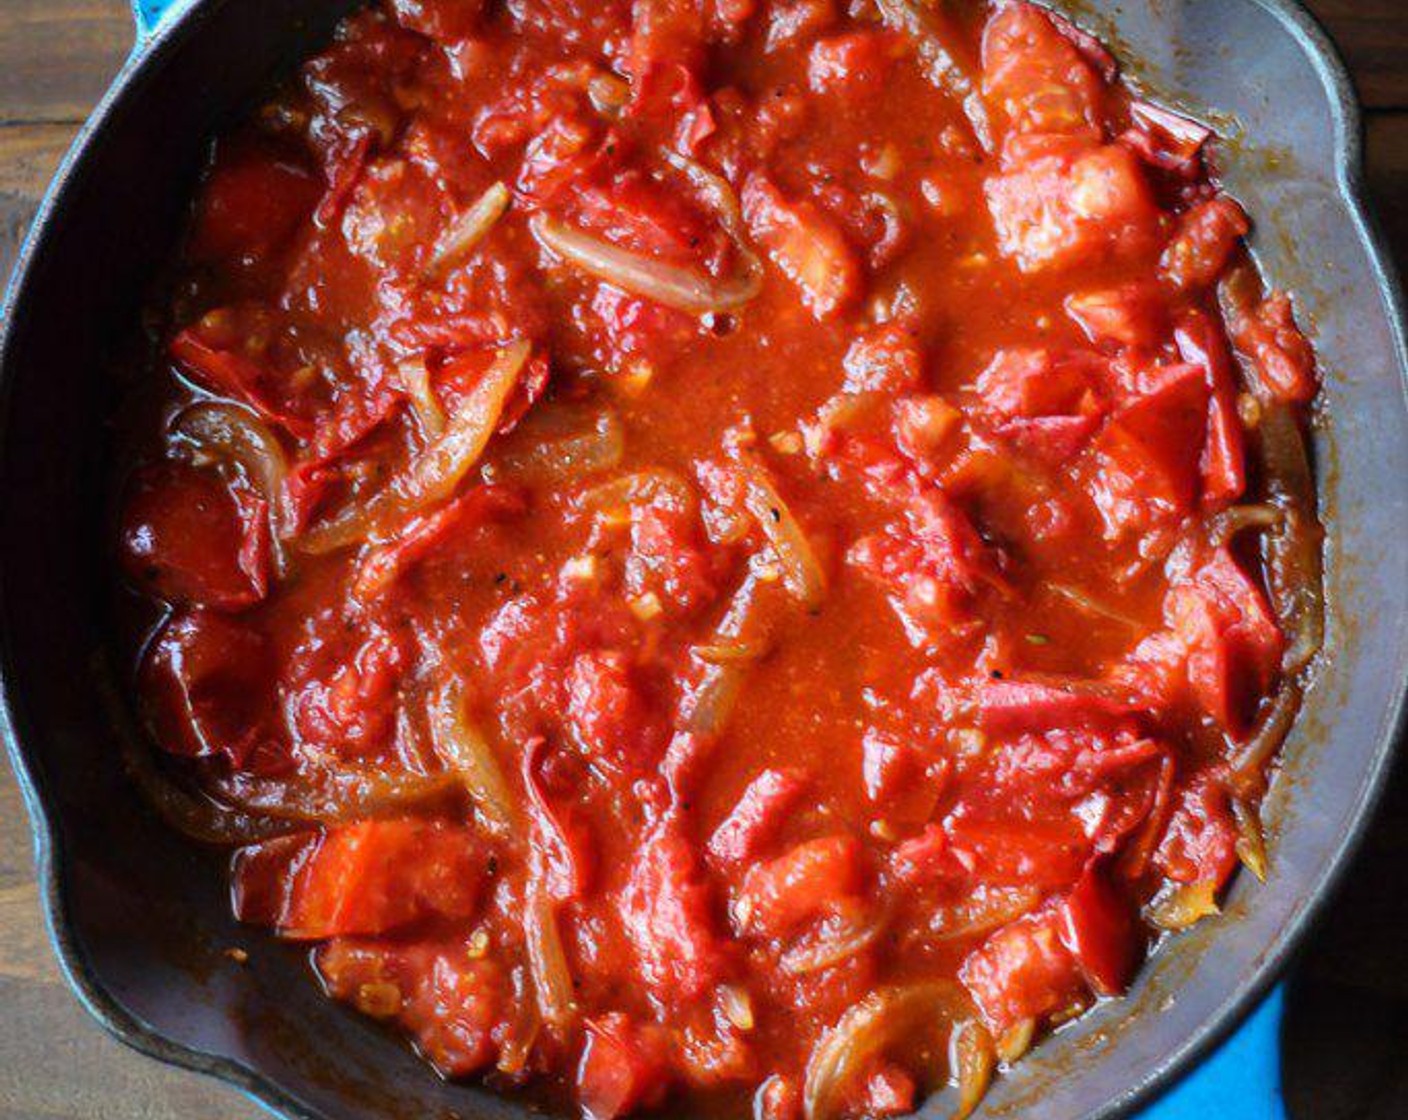 step 5 Gently stir tomato sauce and cook until some of the water has evaporated, about 3 minutes more.